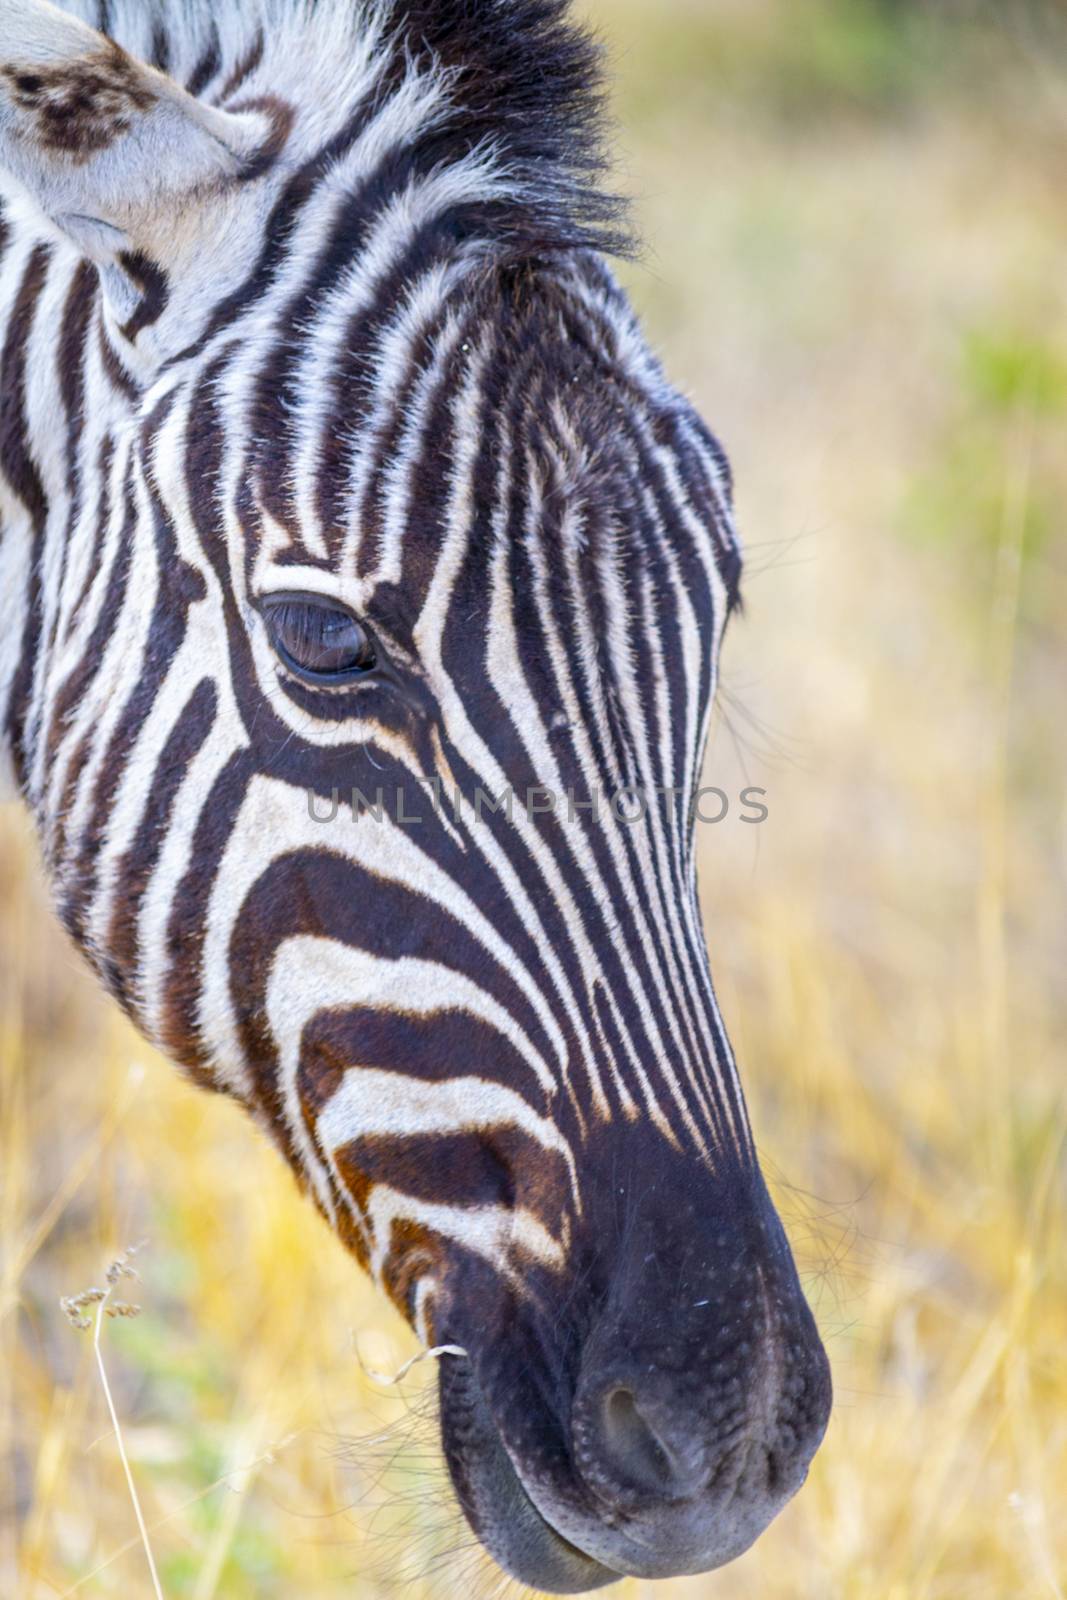 Close-up and portrait of a Zebra head, eating grass in the African savannah